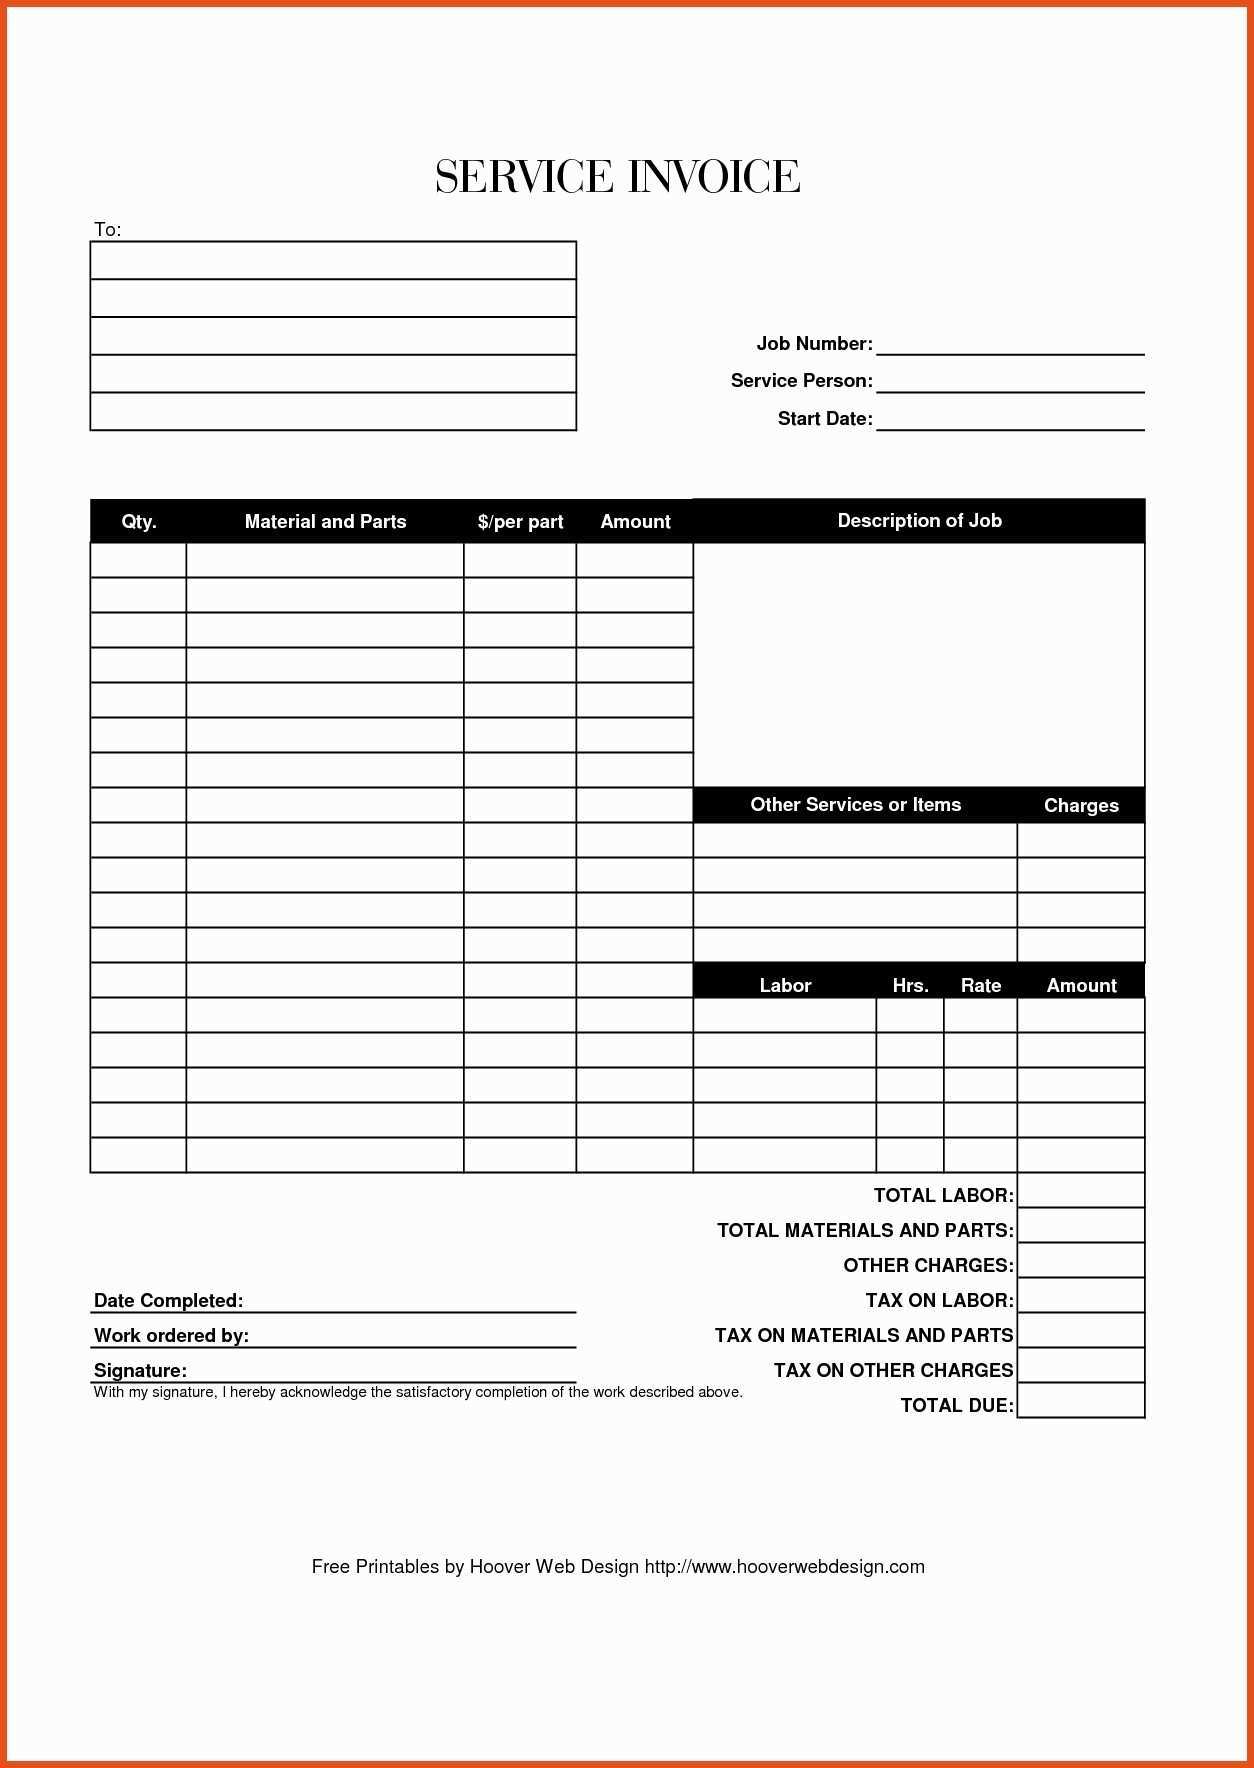 21 Blank Free Printable Social Security Card Template Download for With Social Security Card Template Download